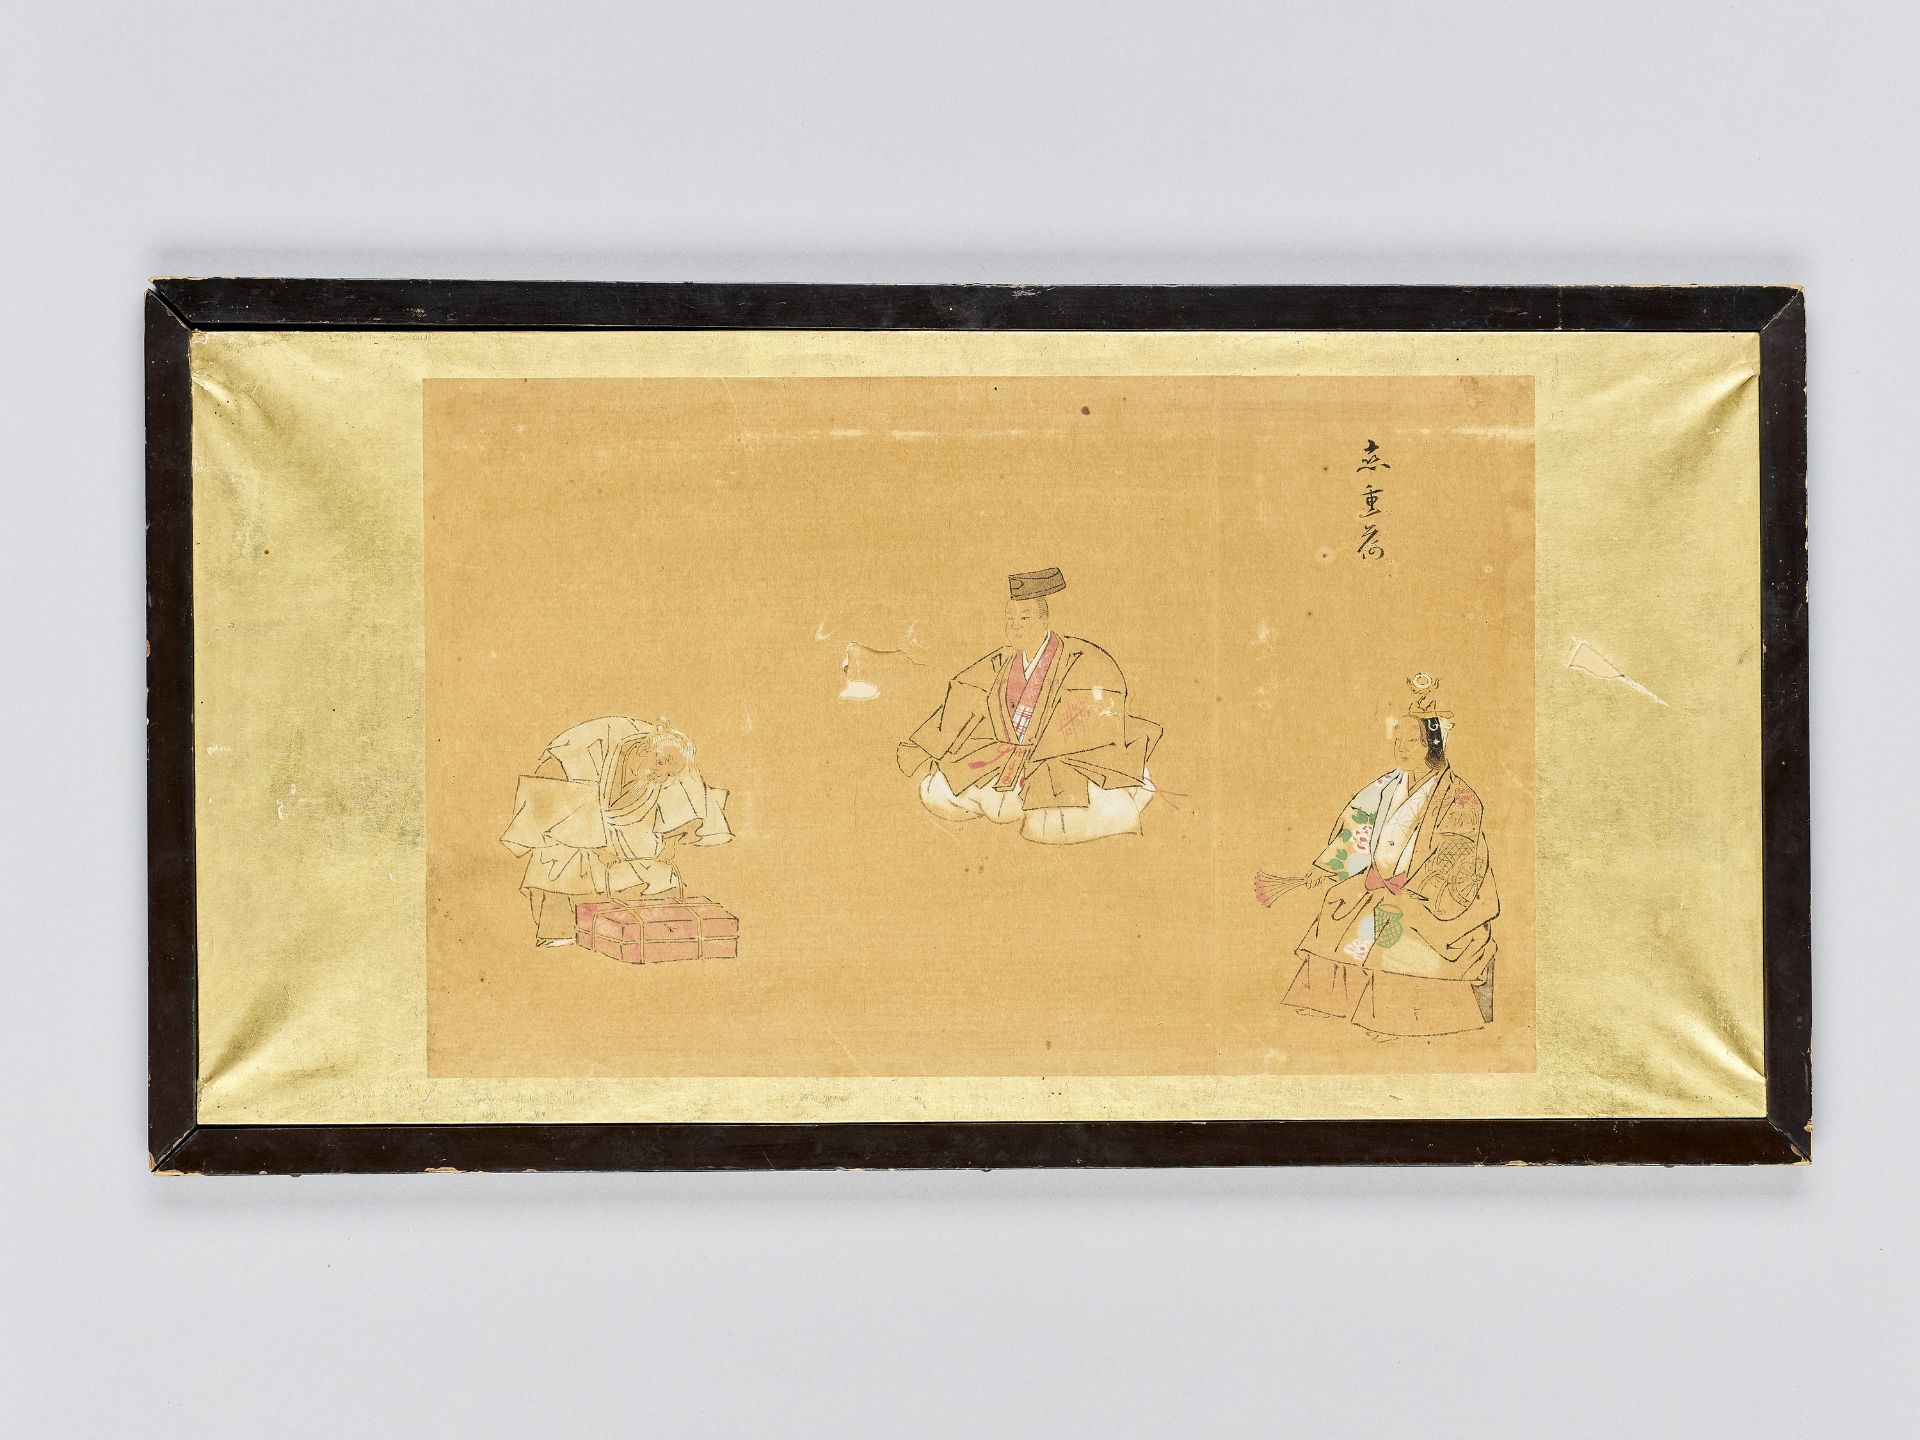 A SMALL PAINTING OF TAOIST FIGURES, 19TH CENTURY